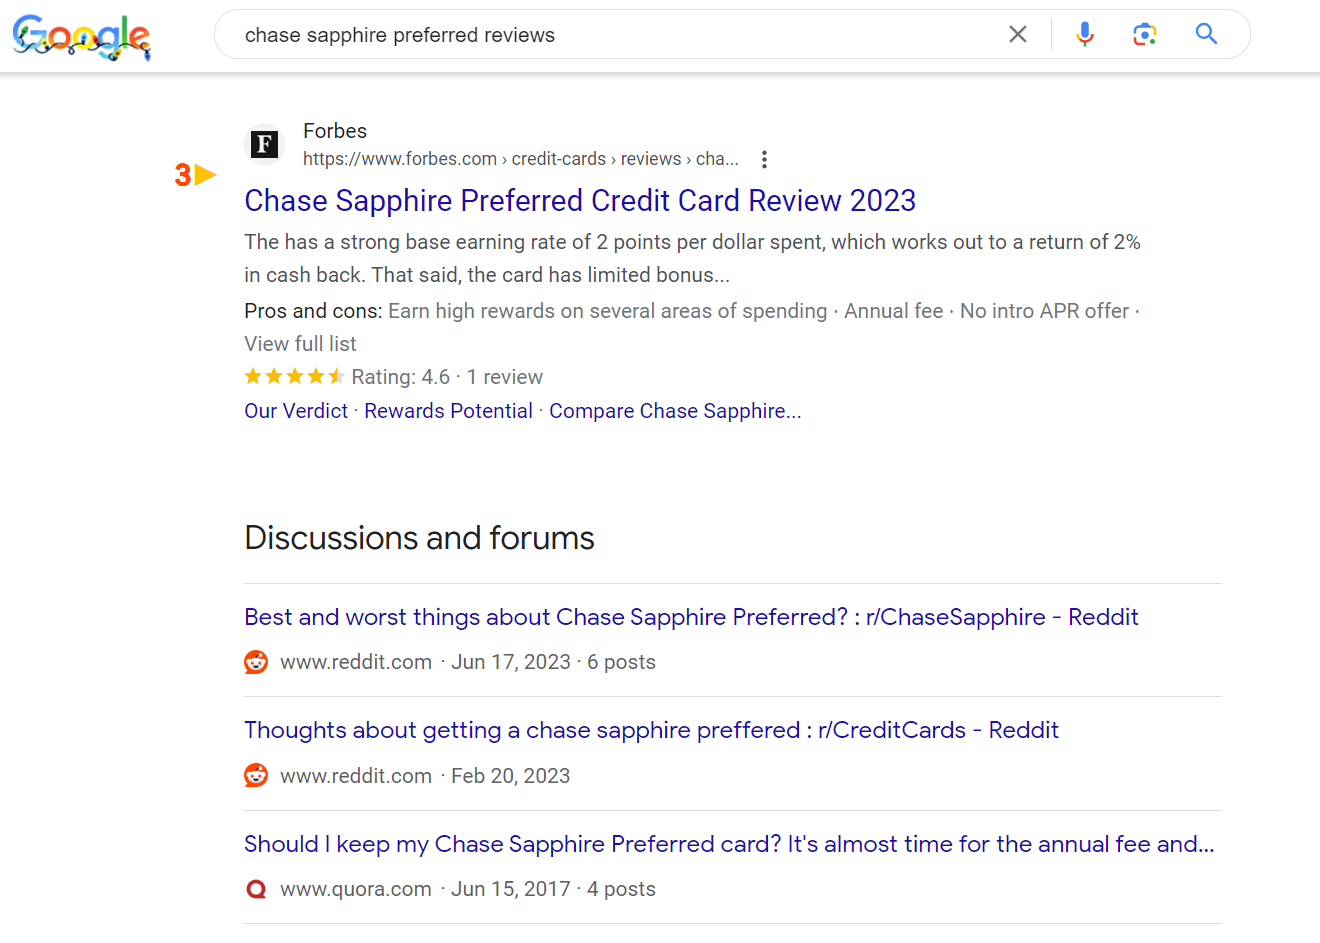 search for chase sapphire preferred reviews